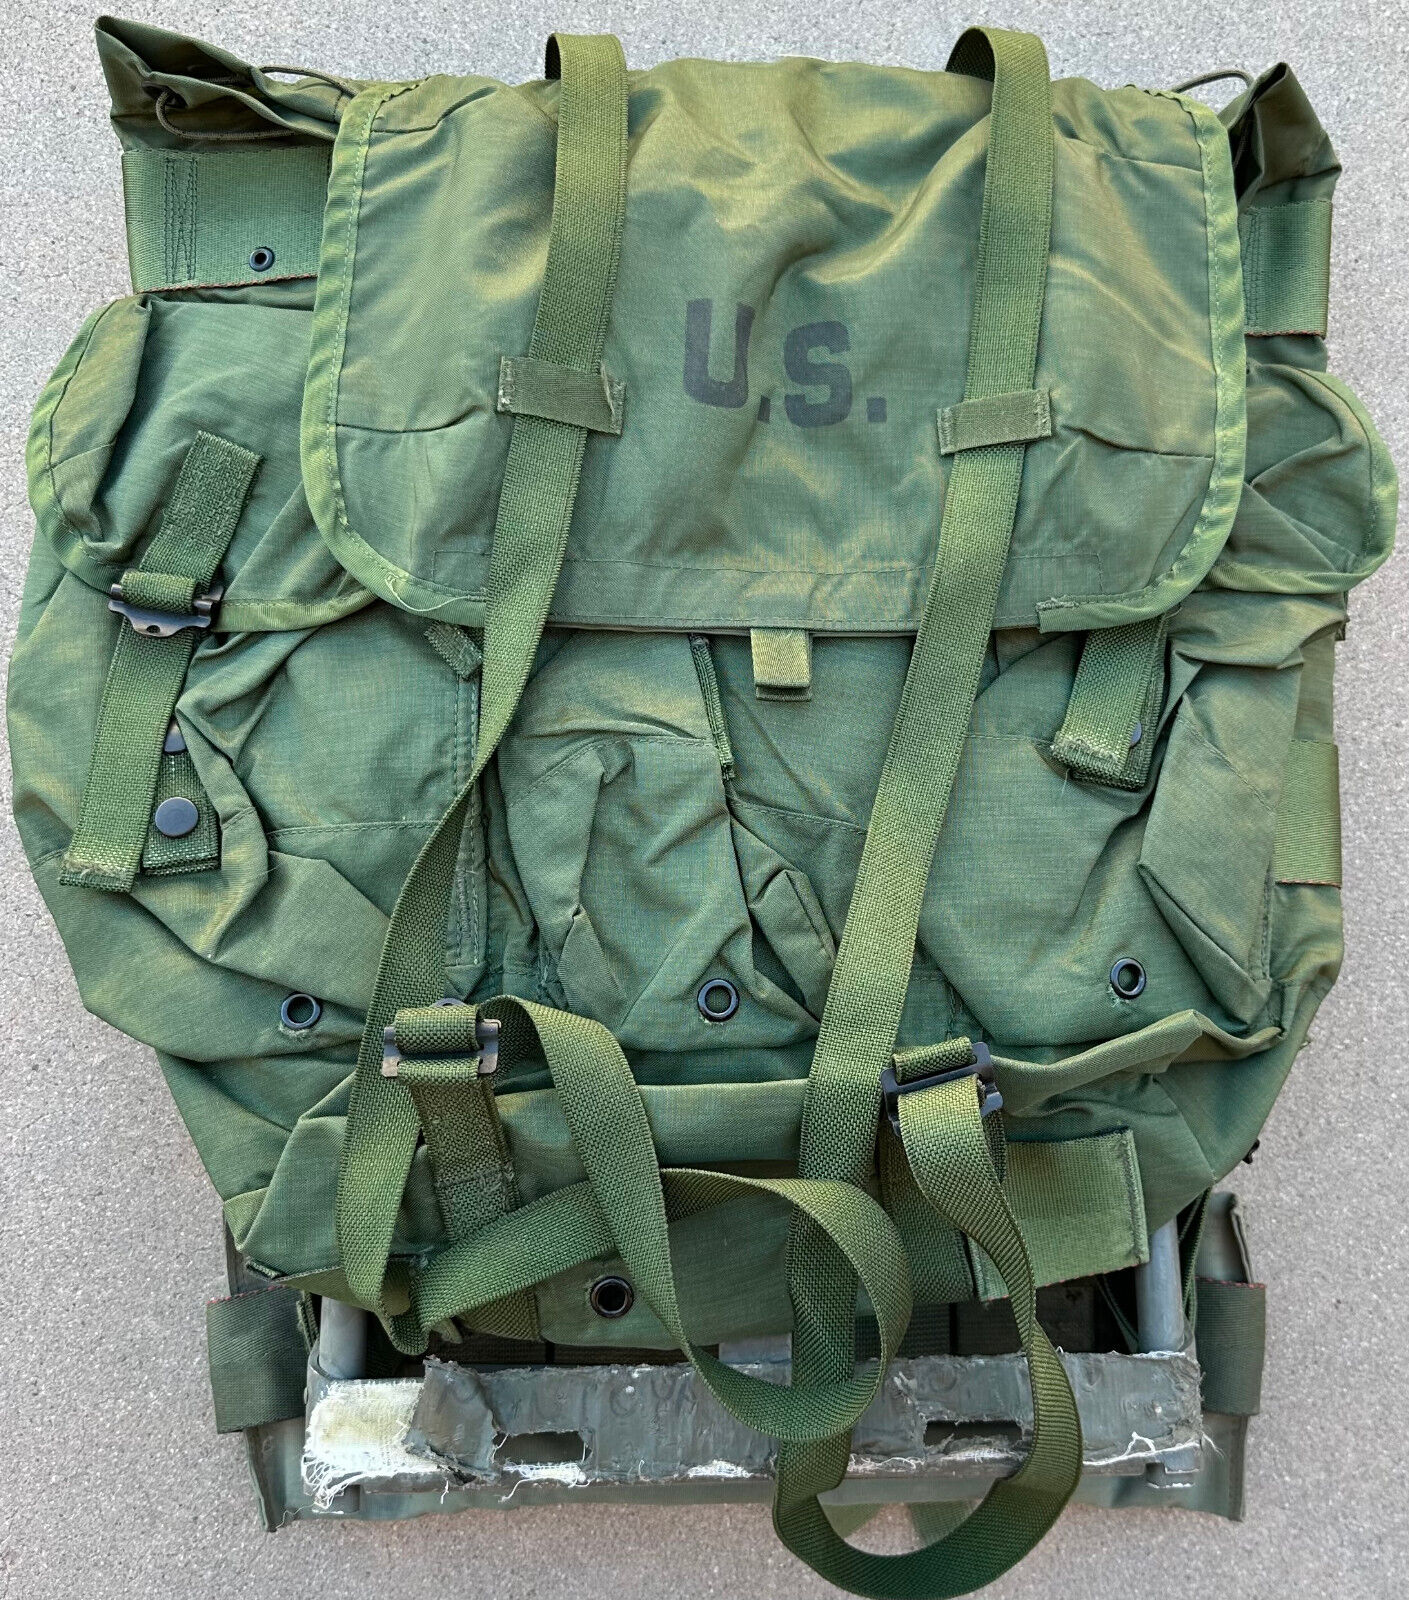 18H VERY GOOD MEDIUM LC-2 ALICE PACK- COMPLETE WITH FRAME, KIDNEY PAD AND STRAPS